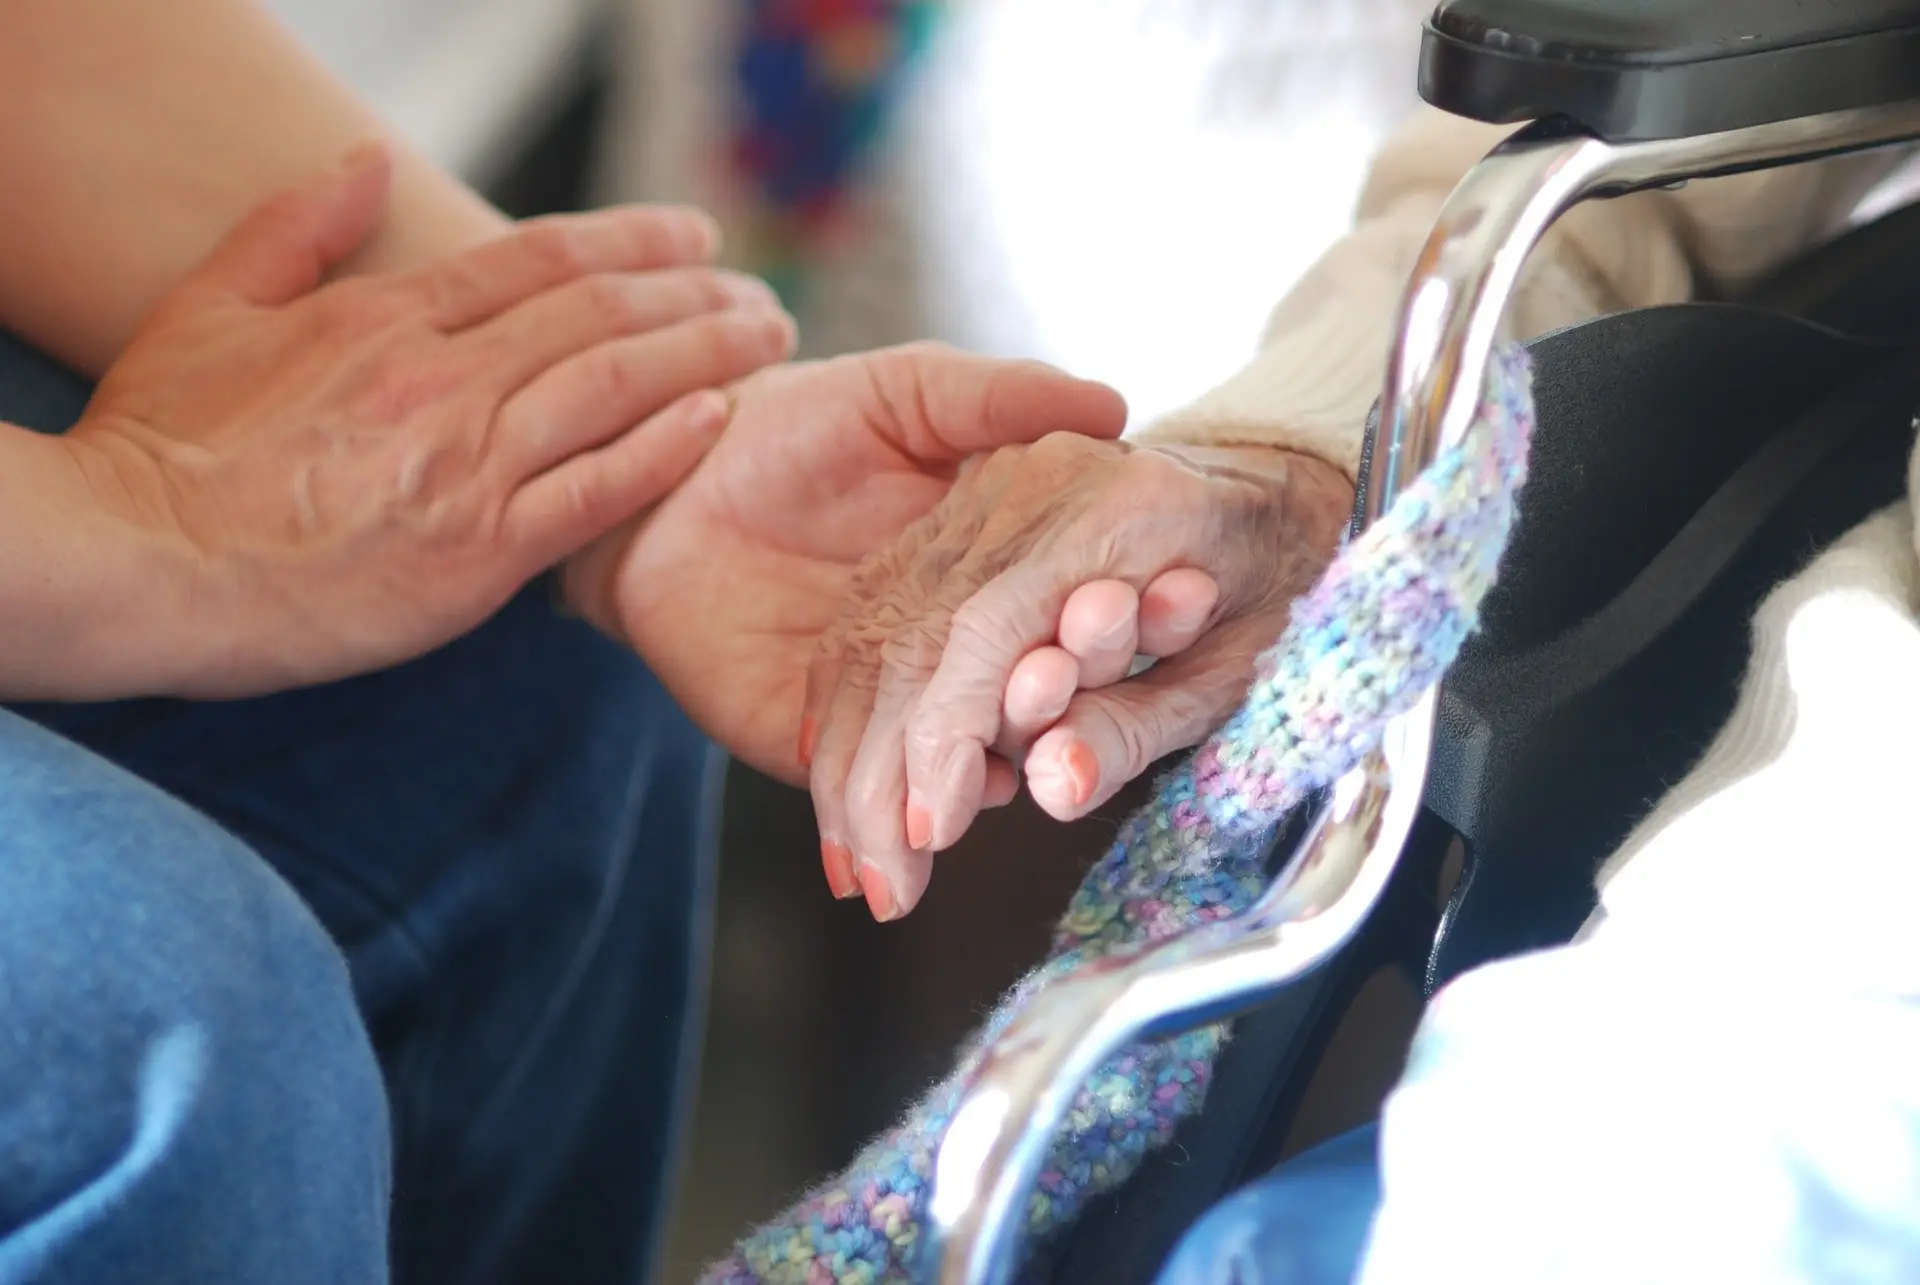 Younger person holding older person's hand